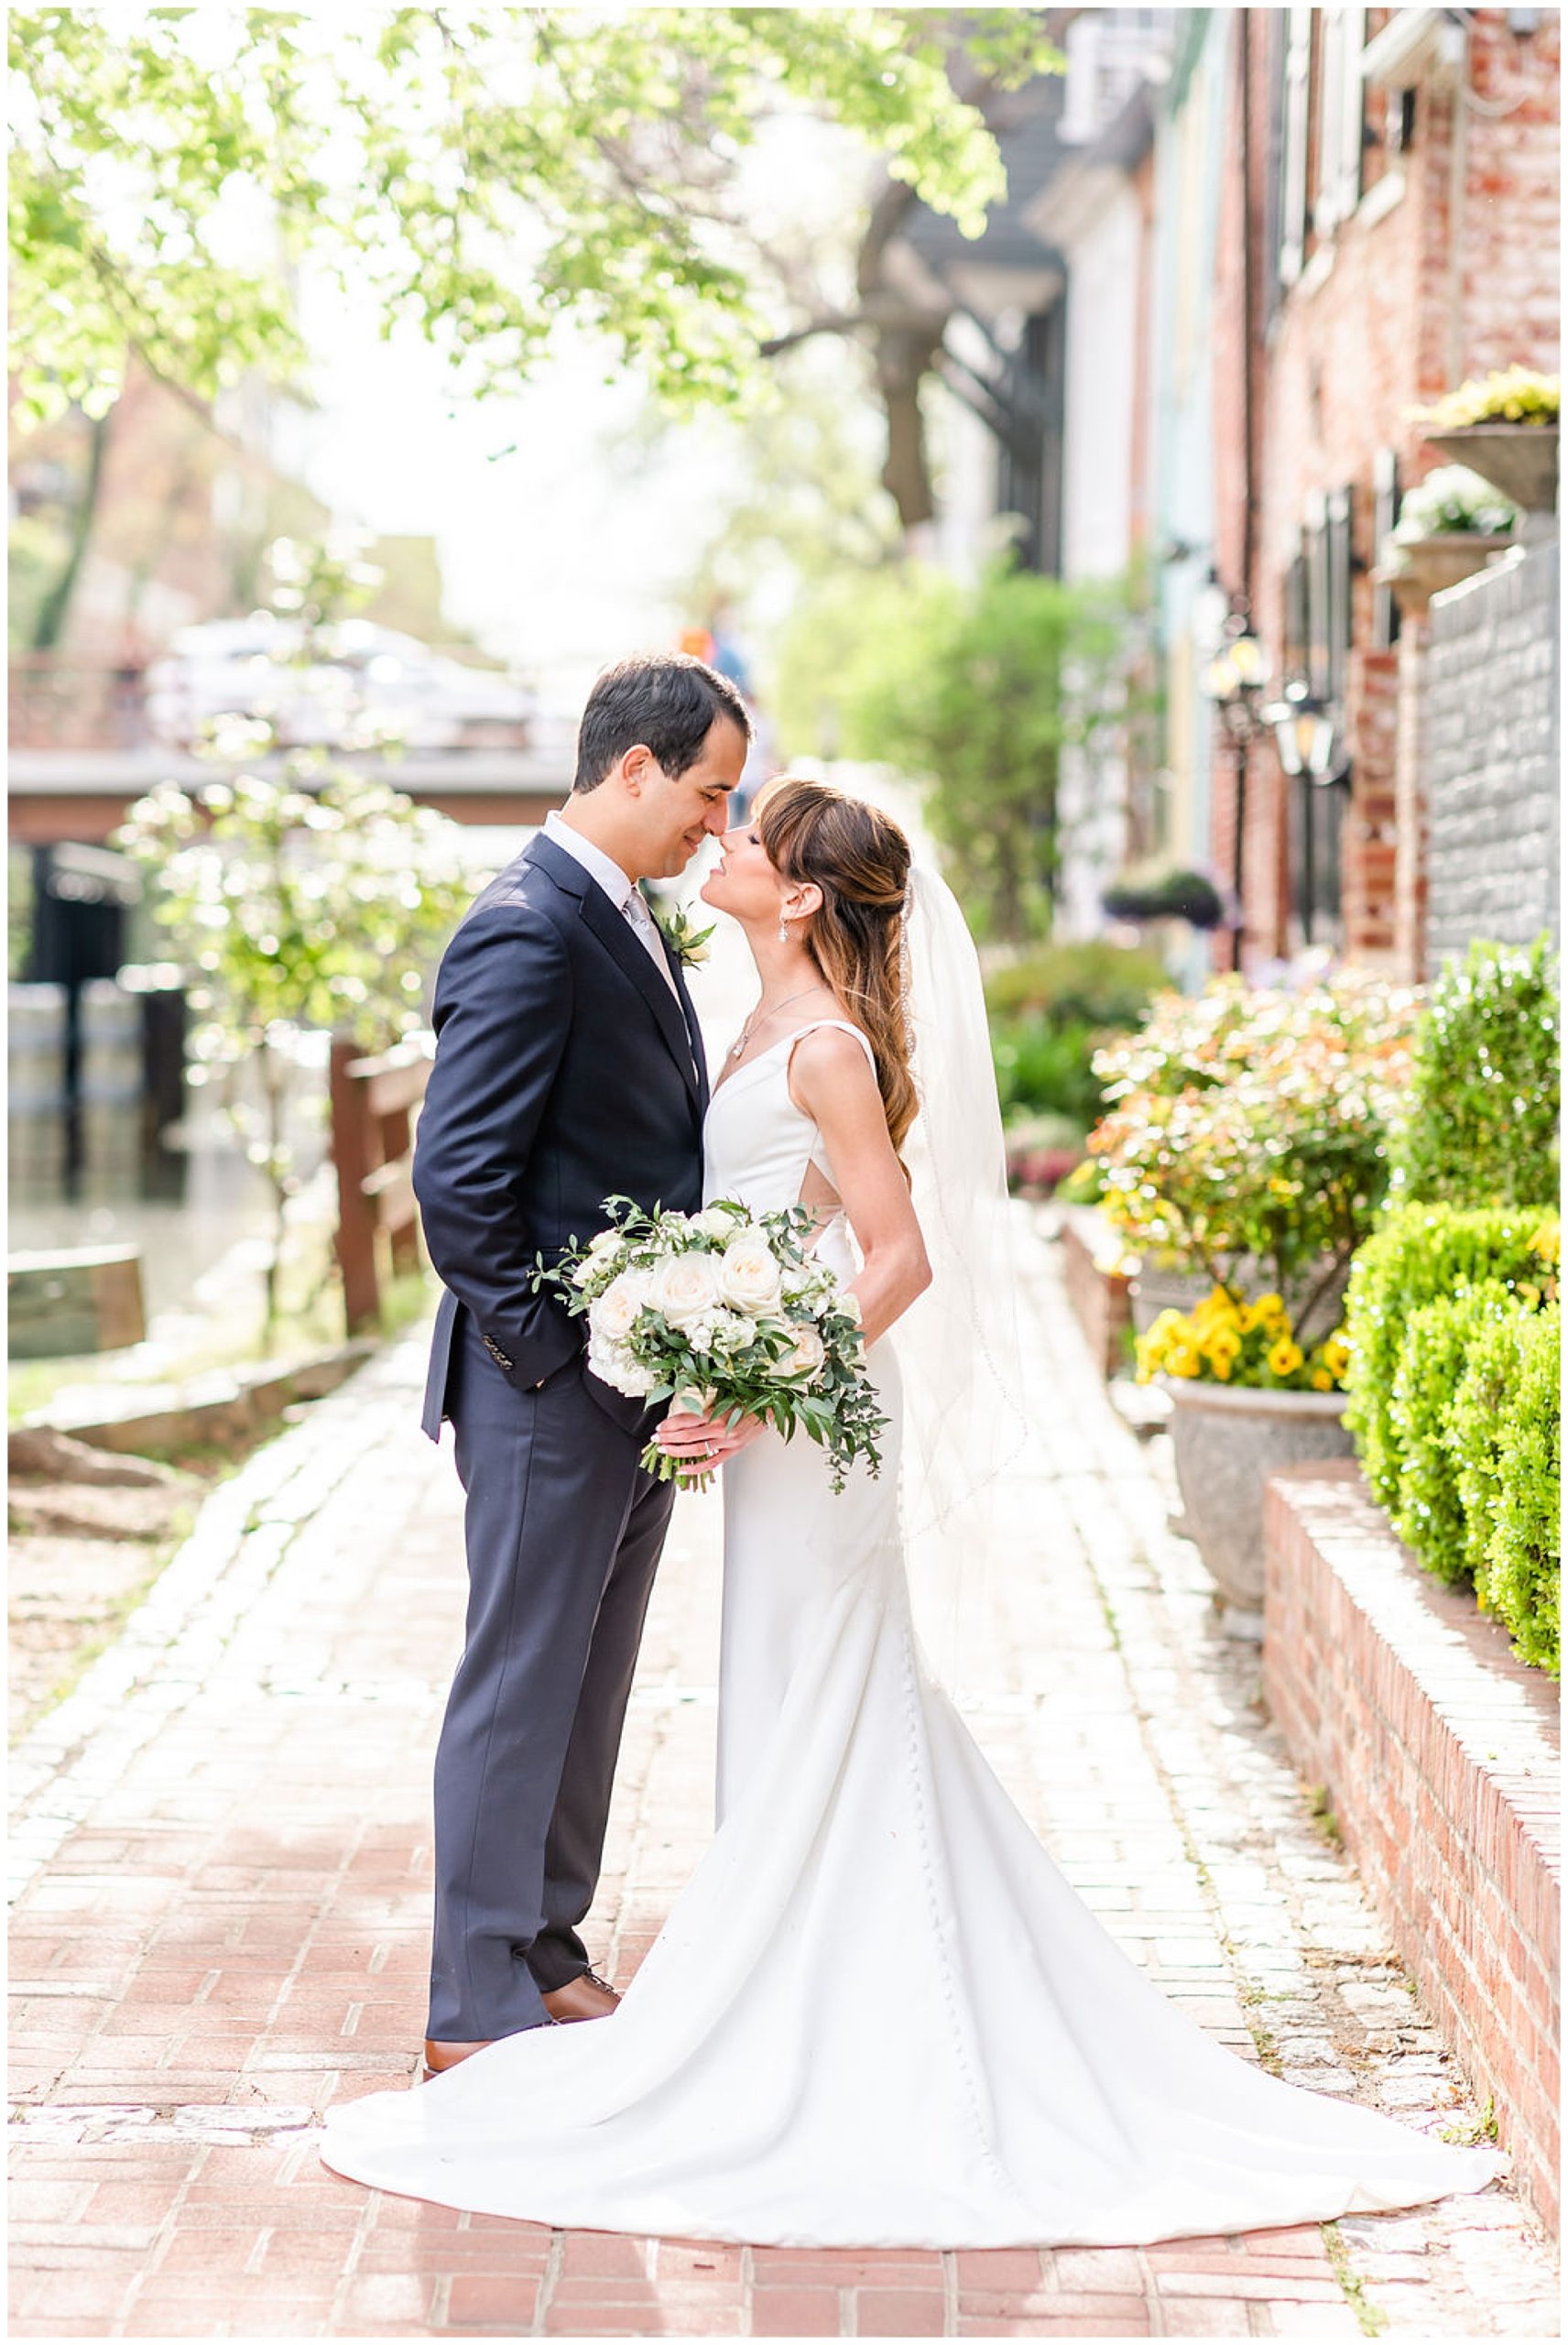 spring Ritz Carlton Georgetown wedding, Georgetown DC wedding, Georgetown Bride, Georgetown couple, DC couple, DC wedding venue, spring wedding, floral focused wedding, classic DC wedding, Ritz Carlton wedding, DC wedding photographer, Georgetown wedding photographer, Rachel E.H. Photography, bride and groom on brick path, bride and groom touching noses and closing eyes